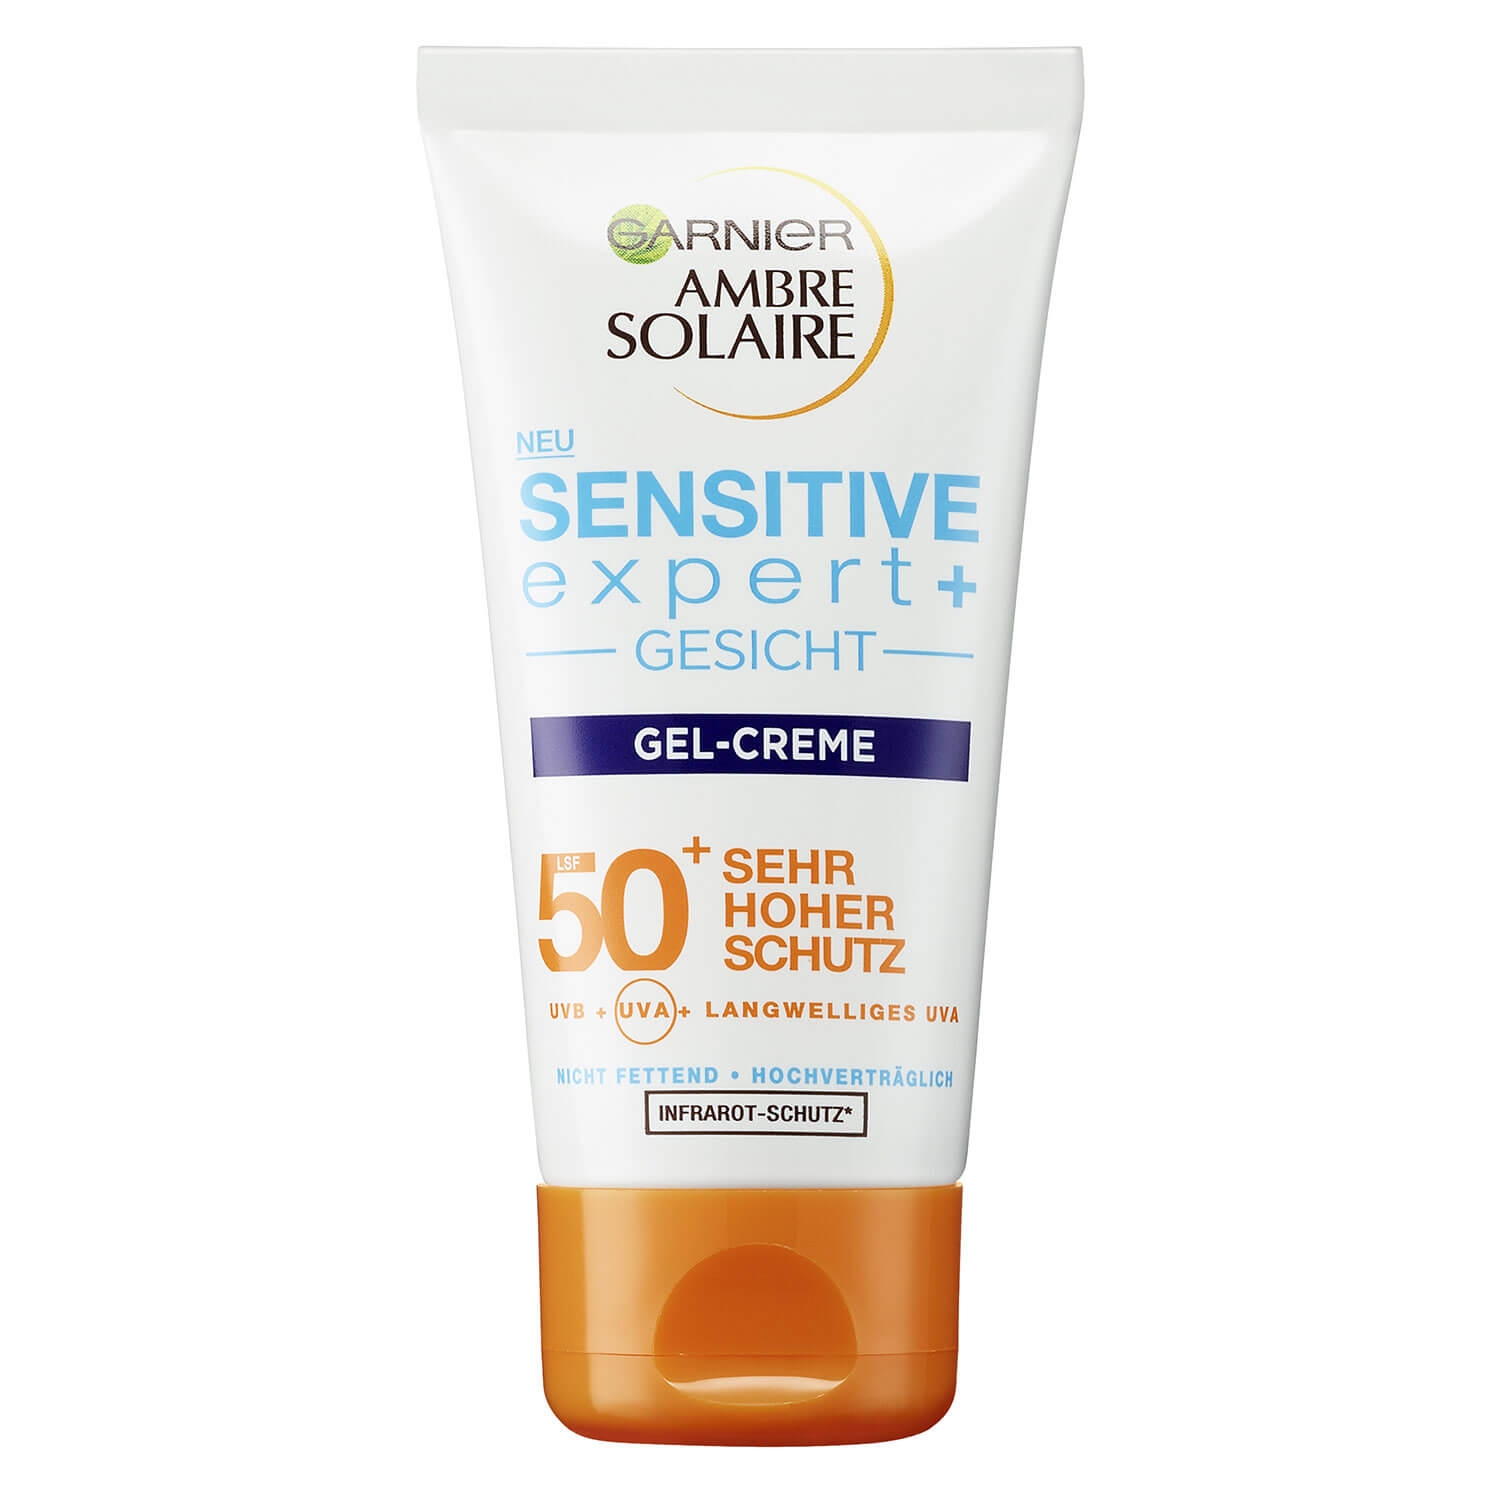 Product image from Ambre Solaire - Sensitive expert+ Gesicht Gel-Creme LSF50+